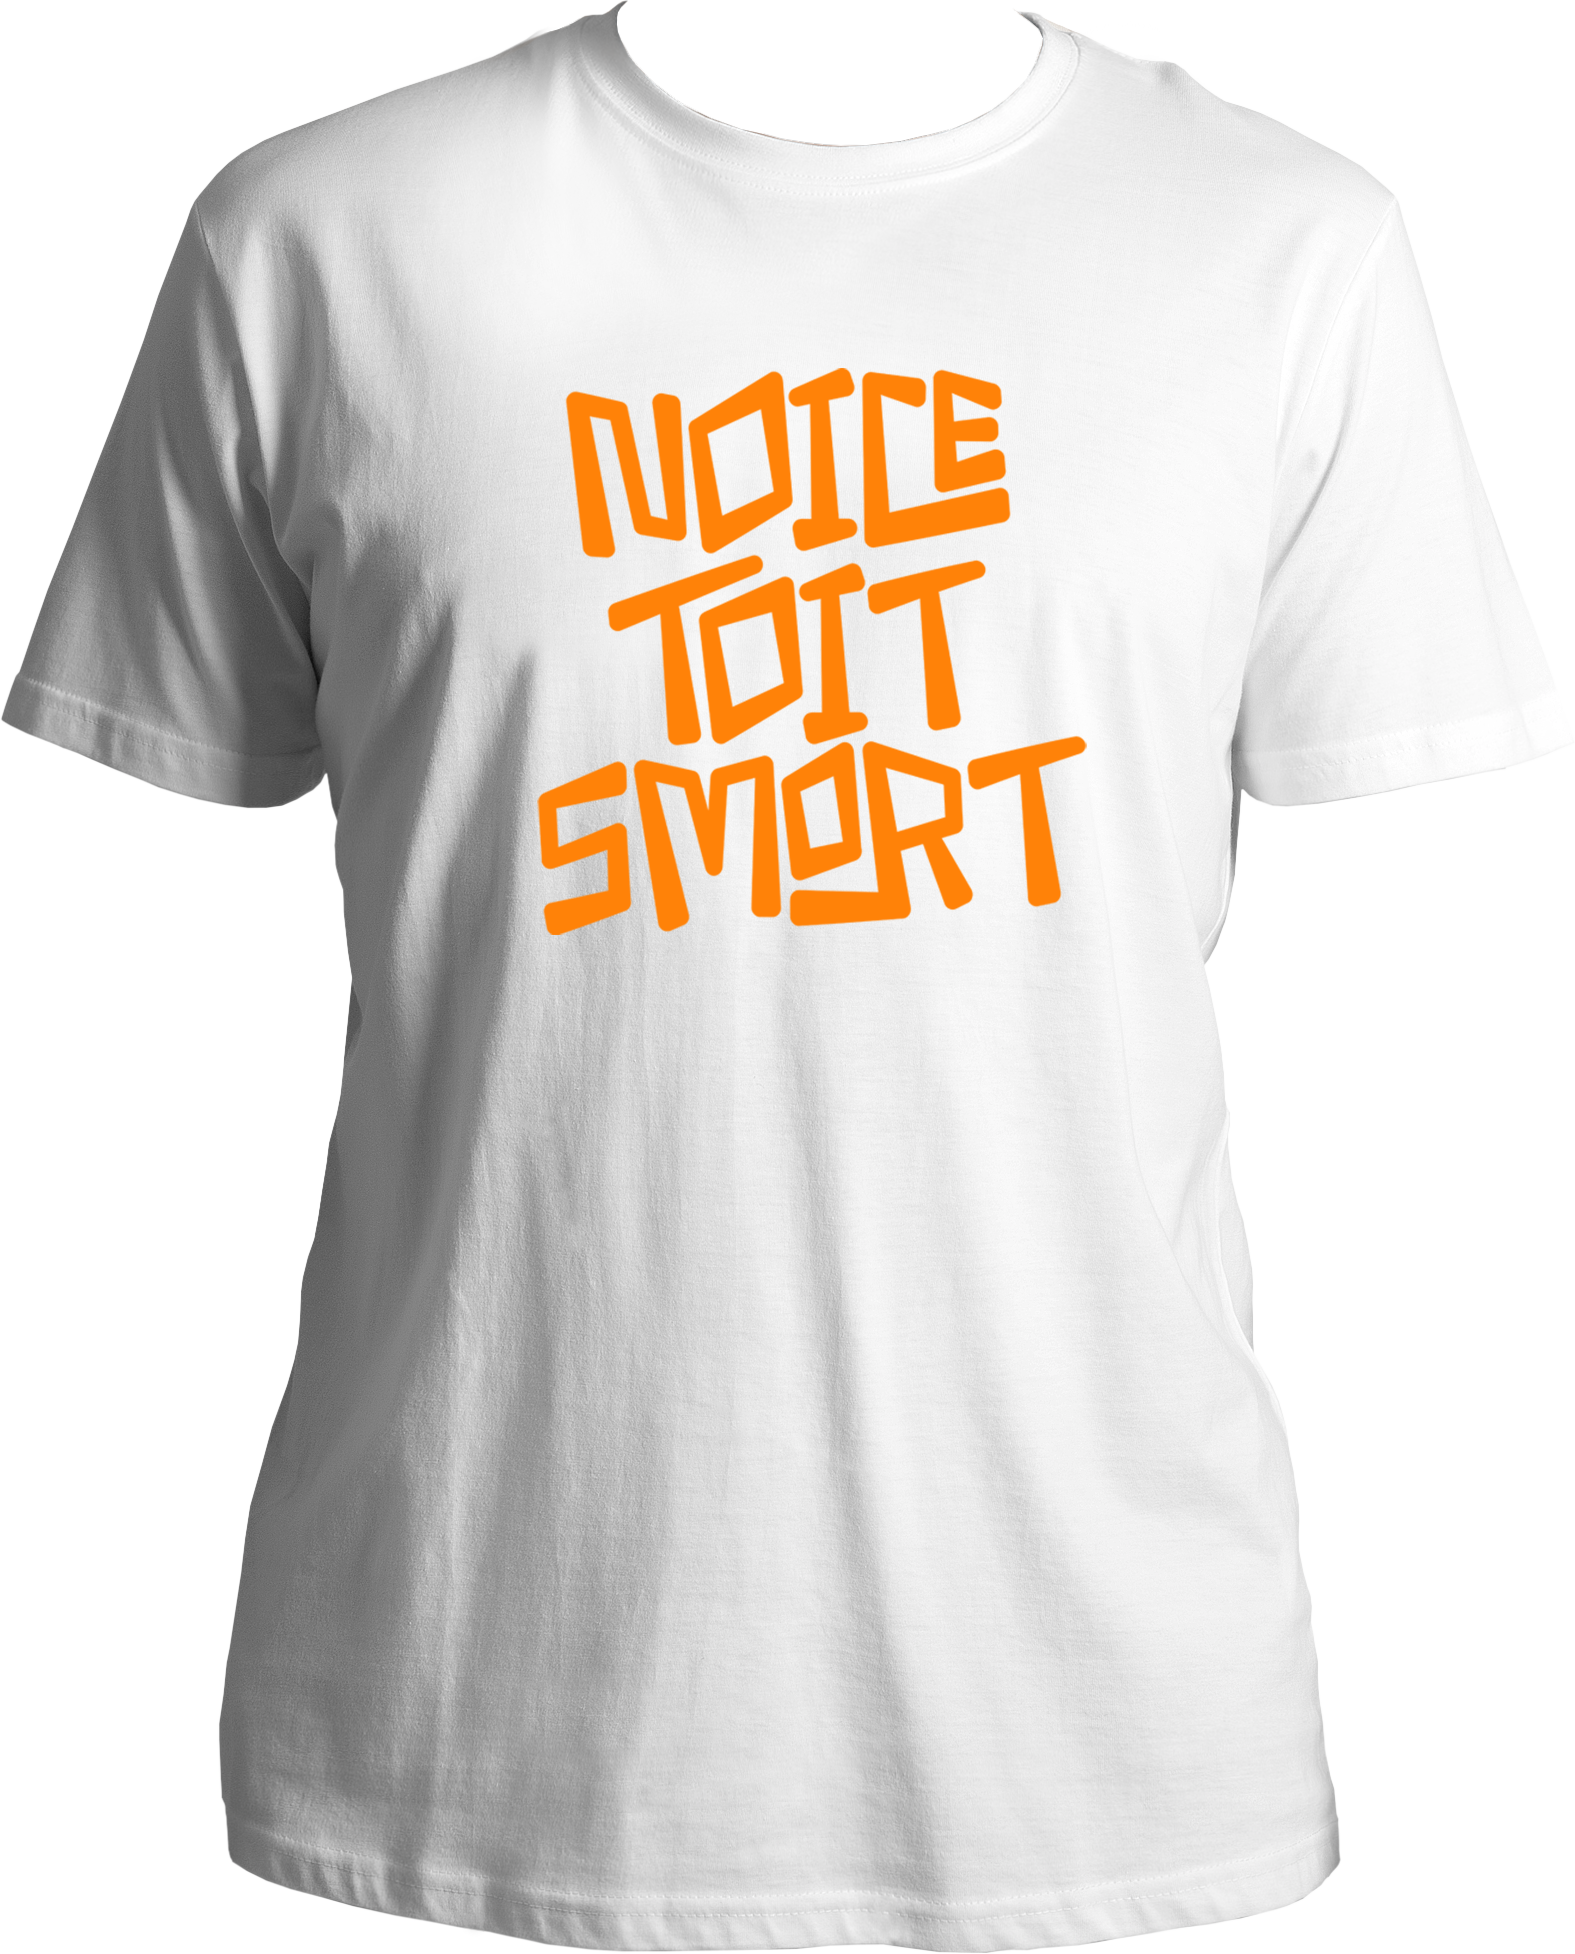 Welcome to our T-shirt collection inspired by the hilarious TV show Brooklyn Nine-Nine! Introducing our unisex cotton T-shirt featuring the iconic phrase "Noice Toit Smort" that captures the essence of the show's humor and wit.